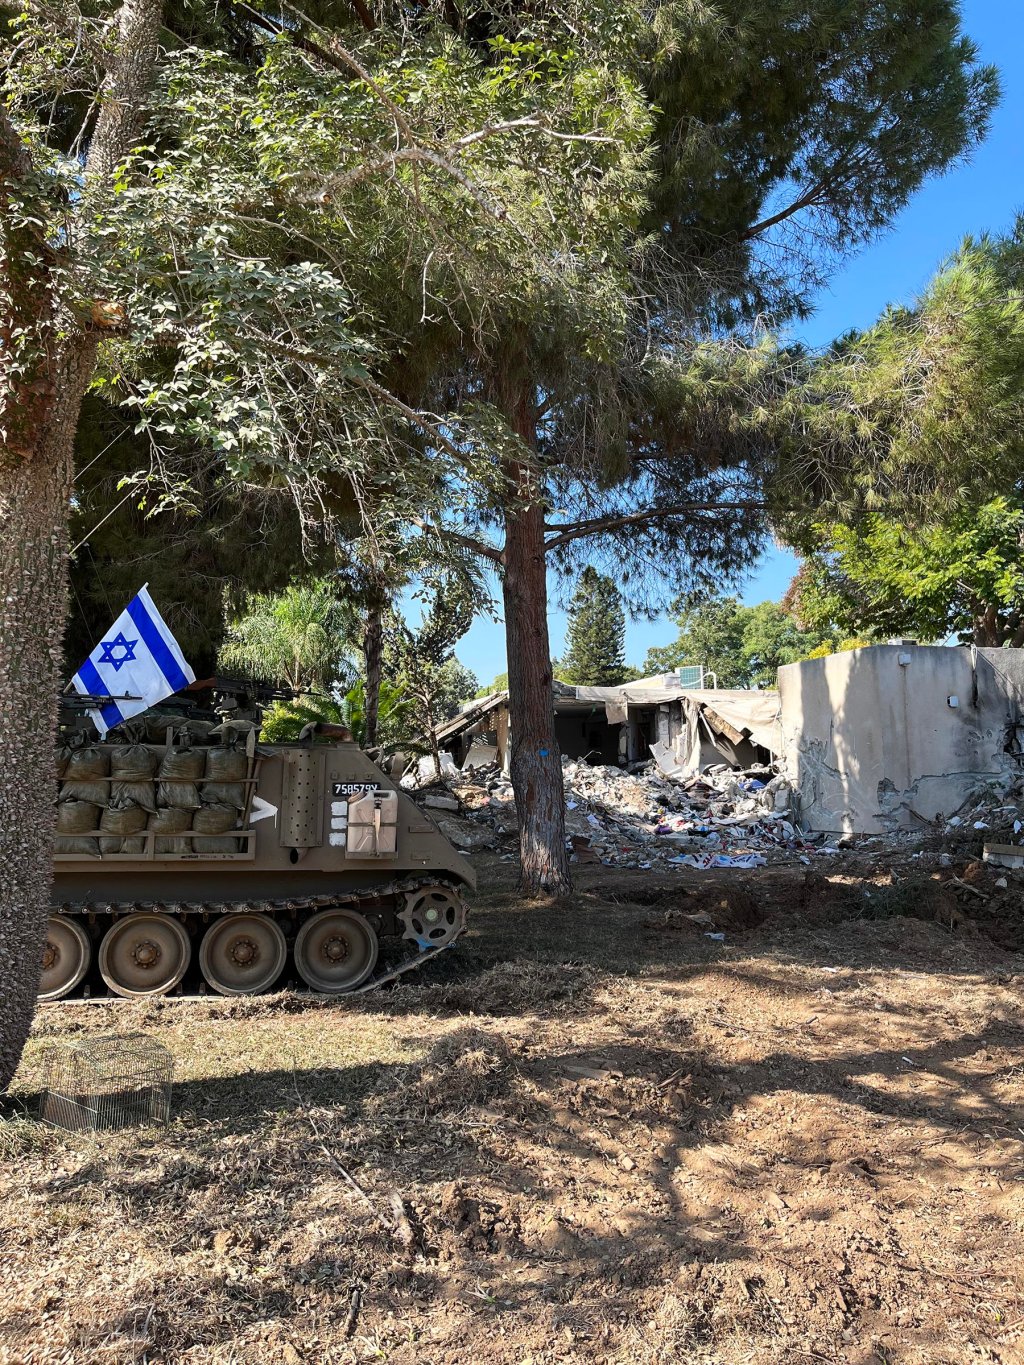 An Israeli Defense Force tank parks next to a destroyed home in Kfar Aza.